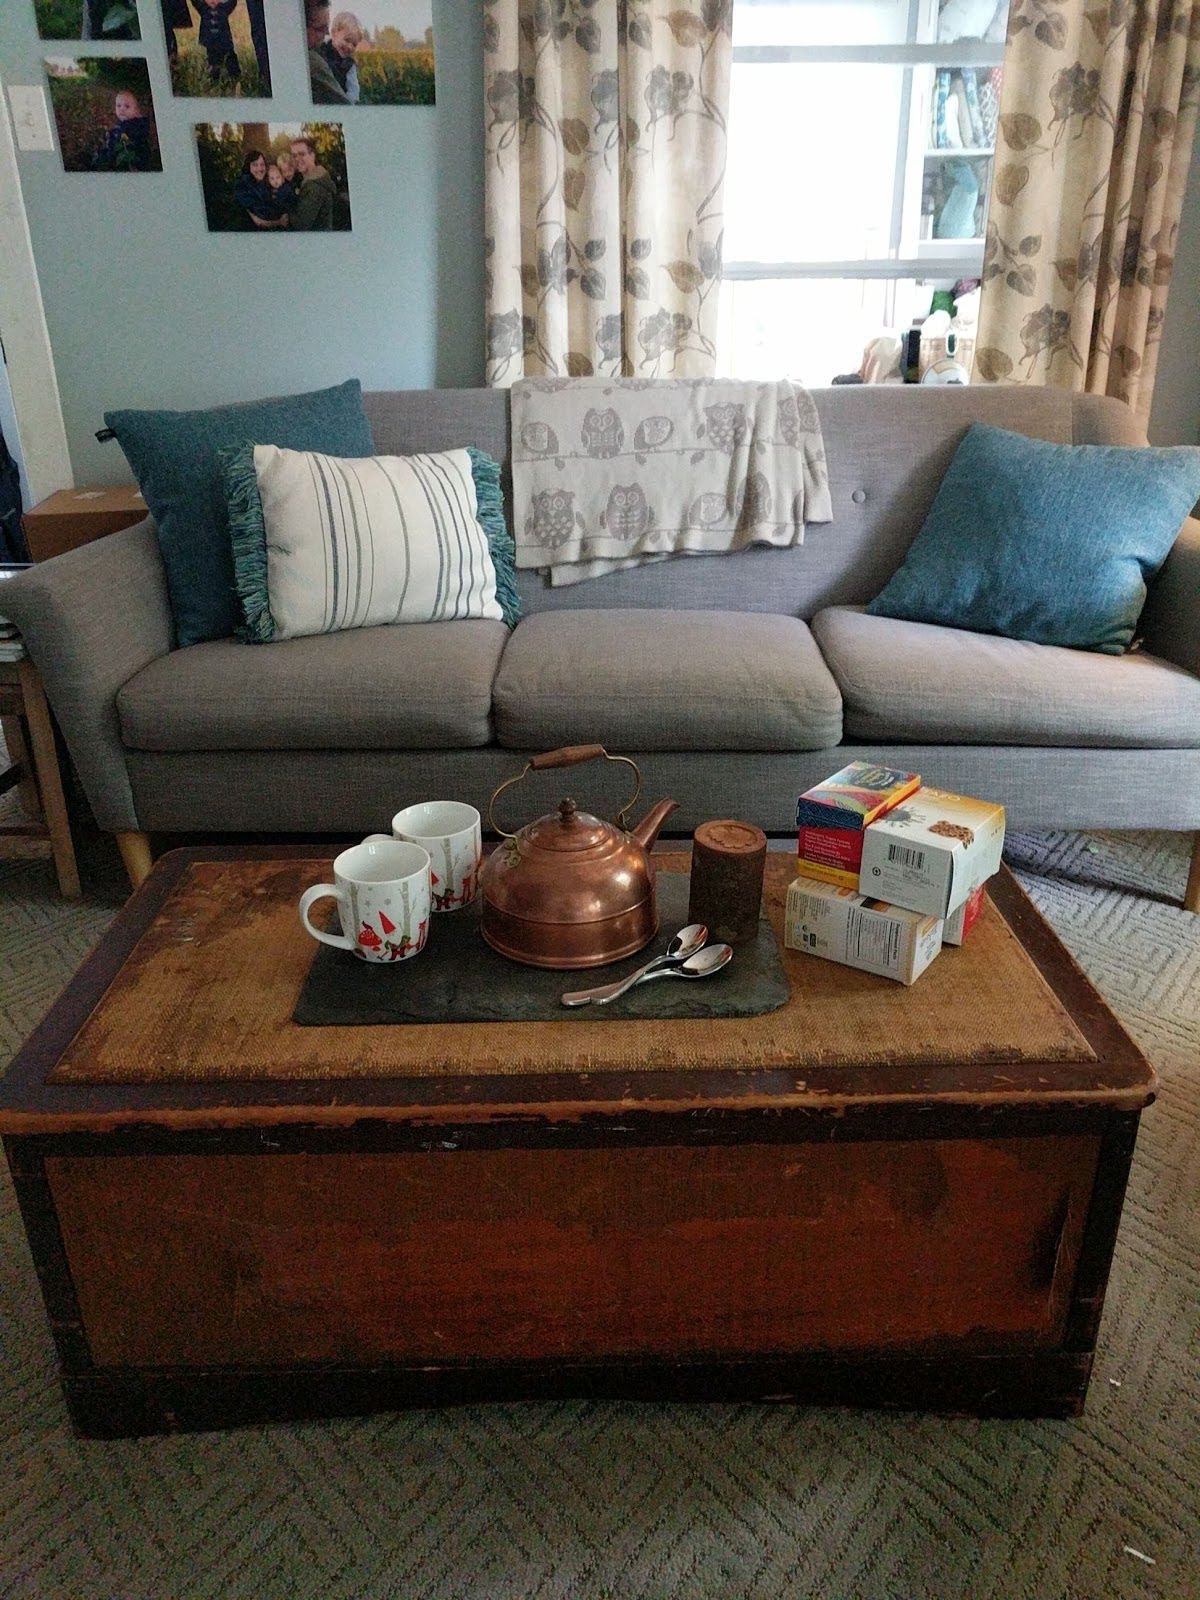 A space for tea and company